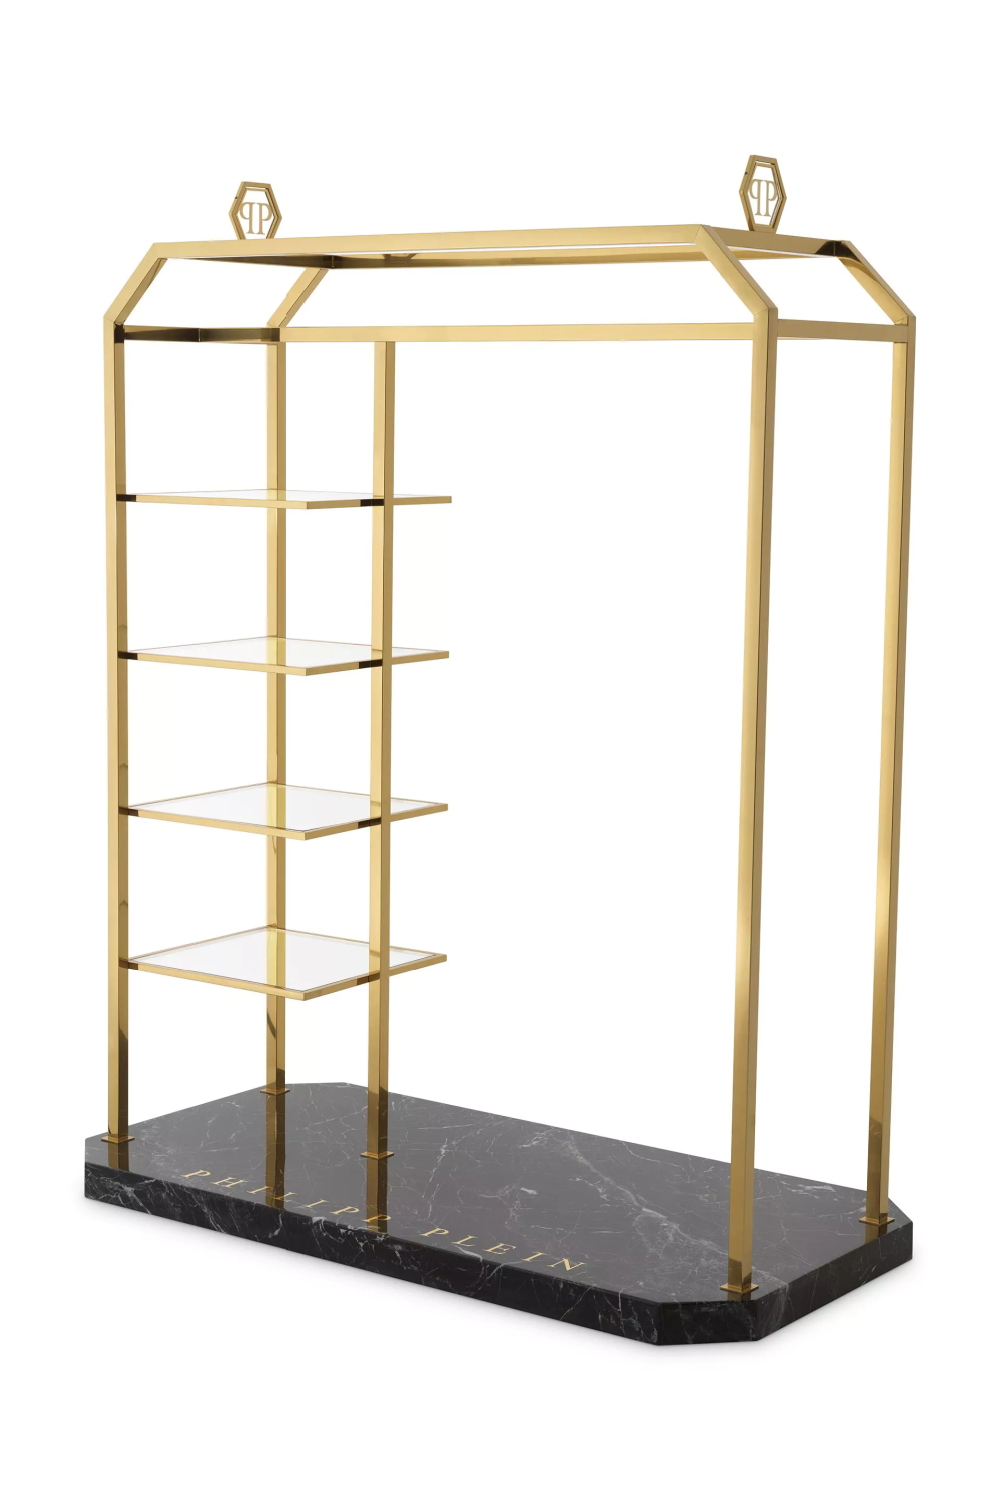 Gold Framed Modern Clothing Stand, Philipp Plein Couture